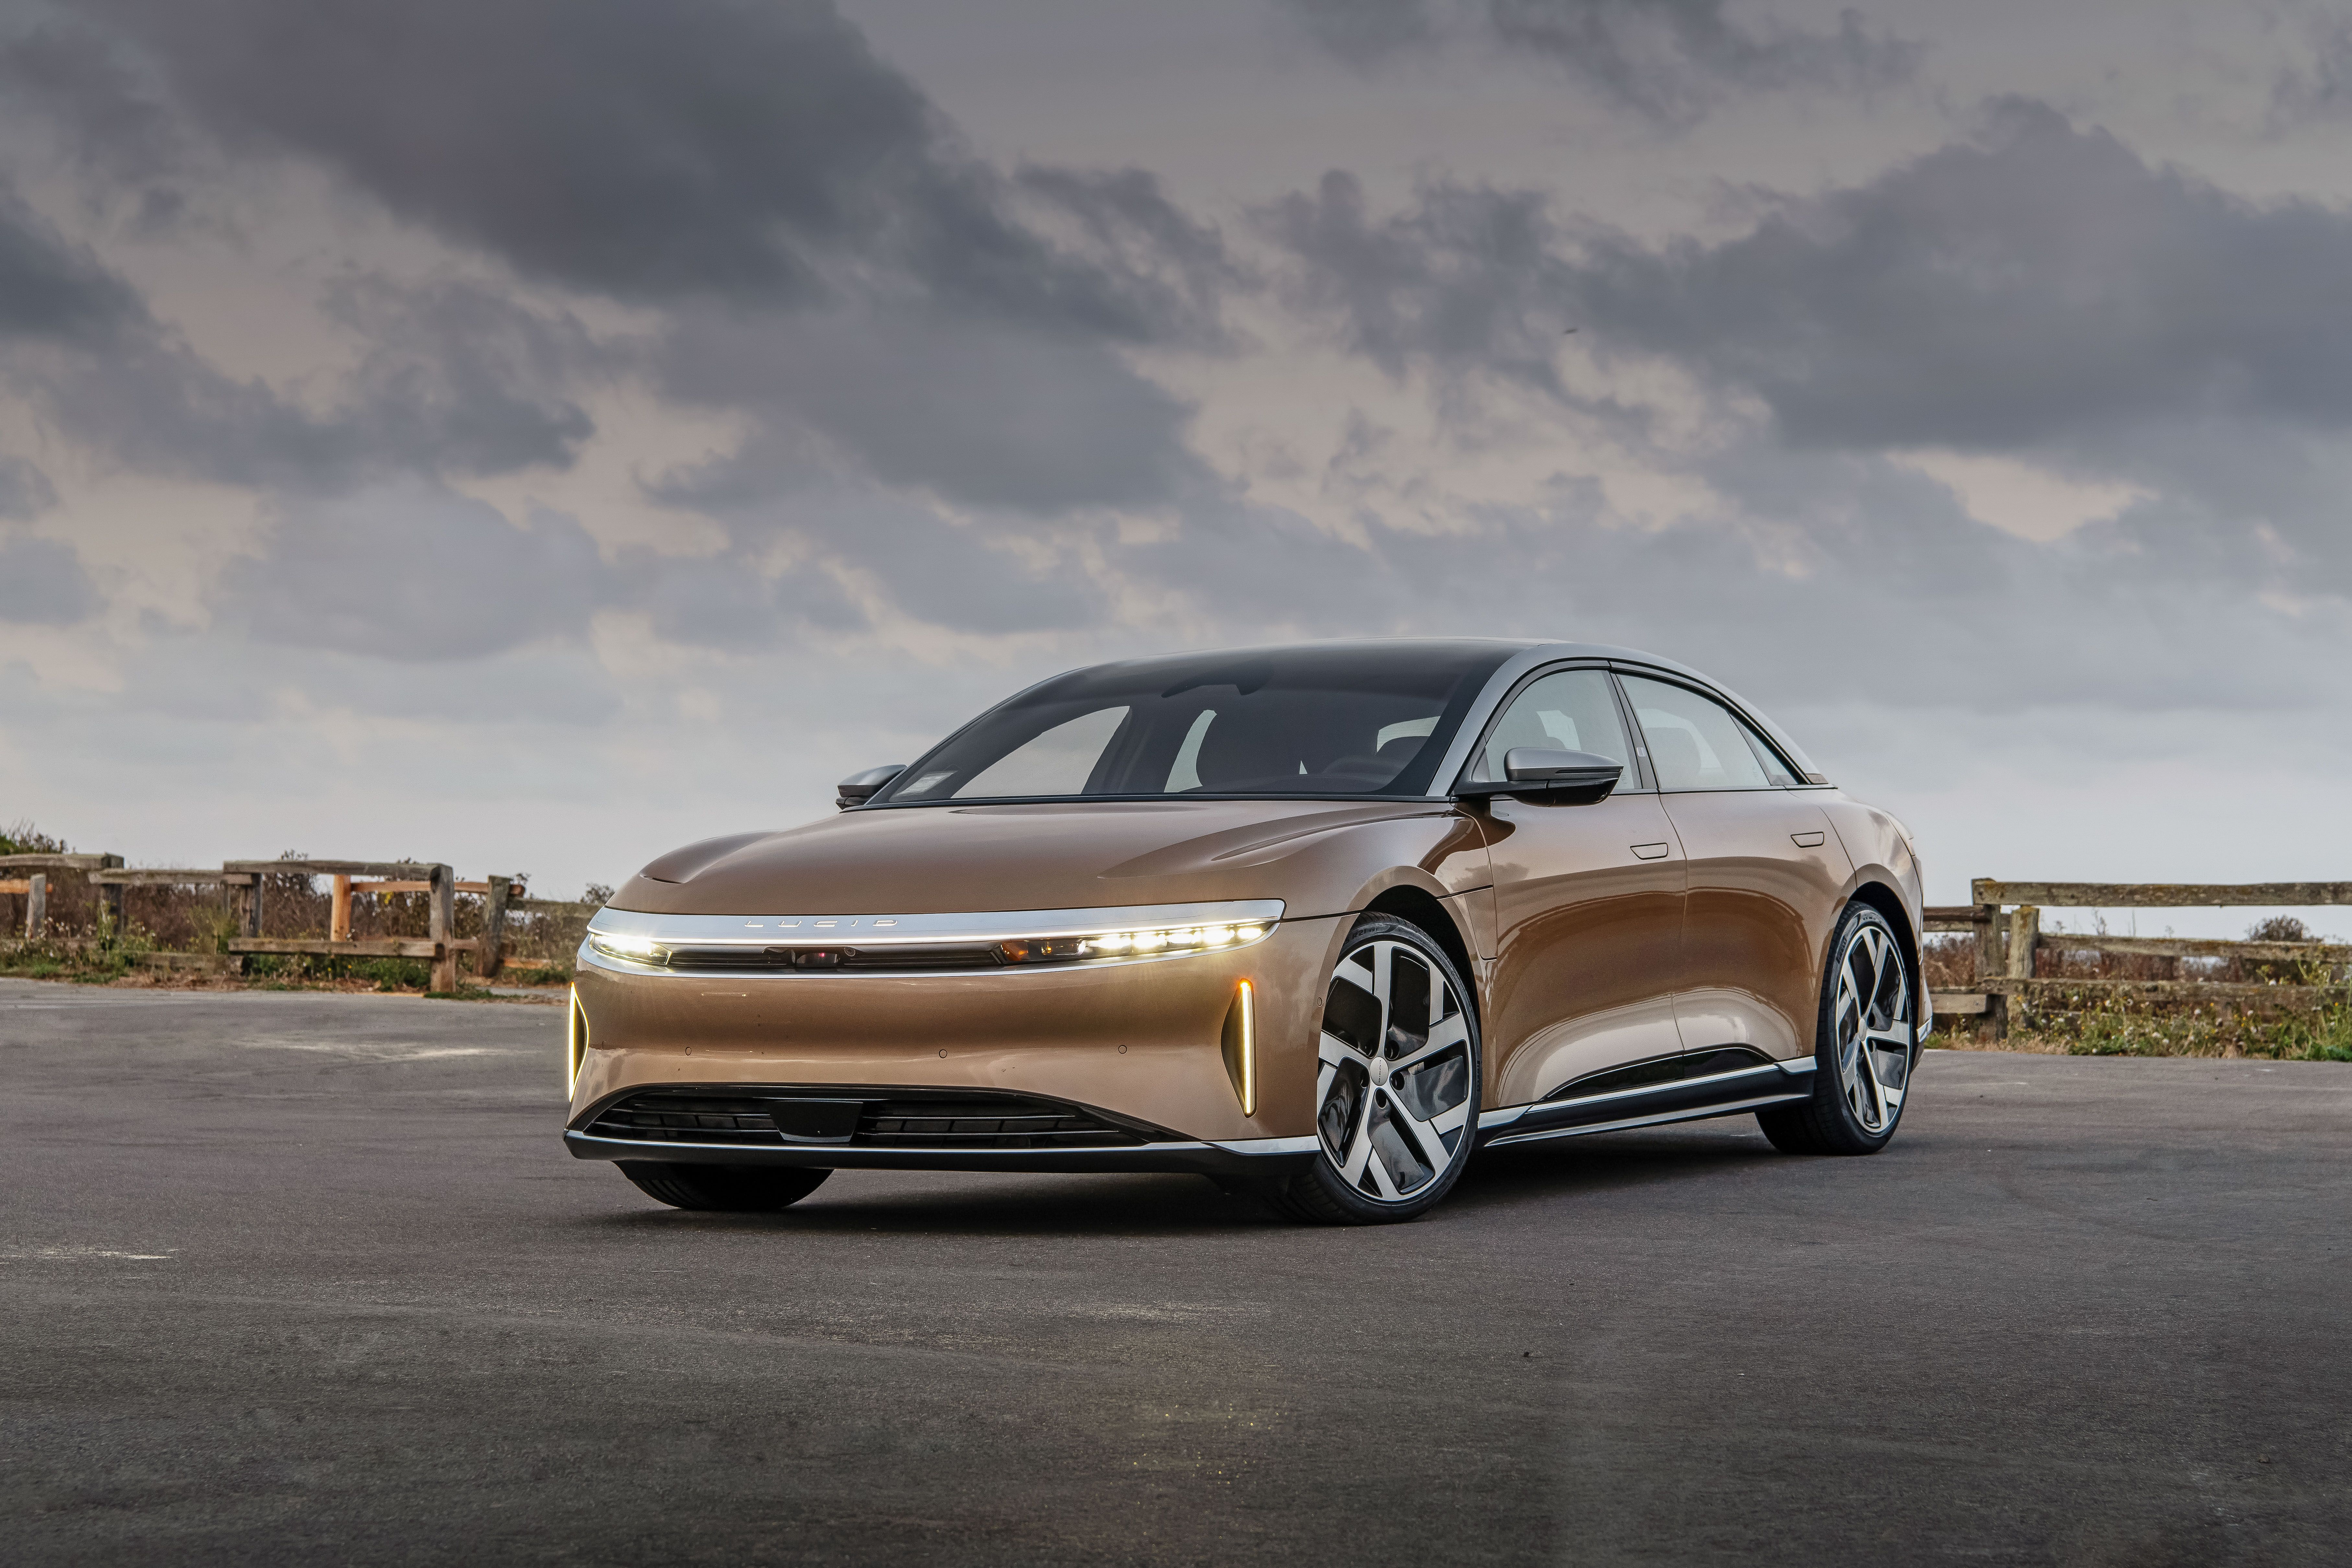 View Photos of the 2022 Lucid Air Dream Edition Performance